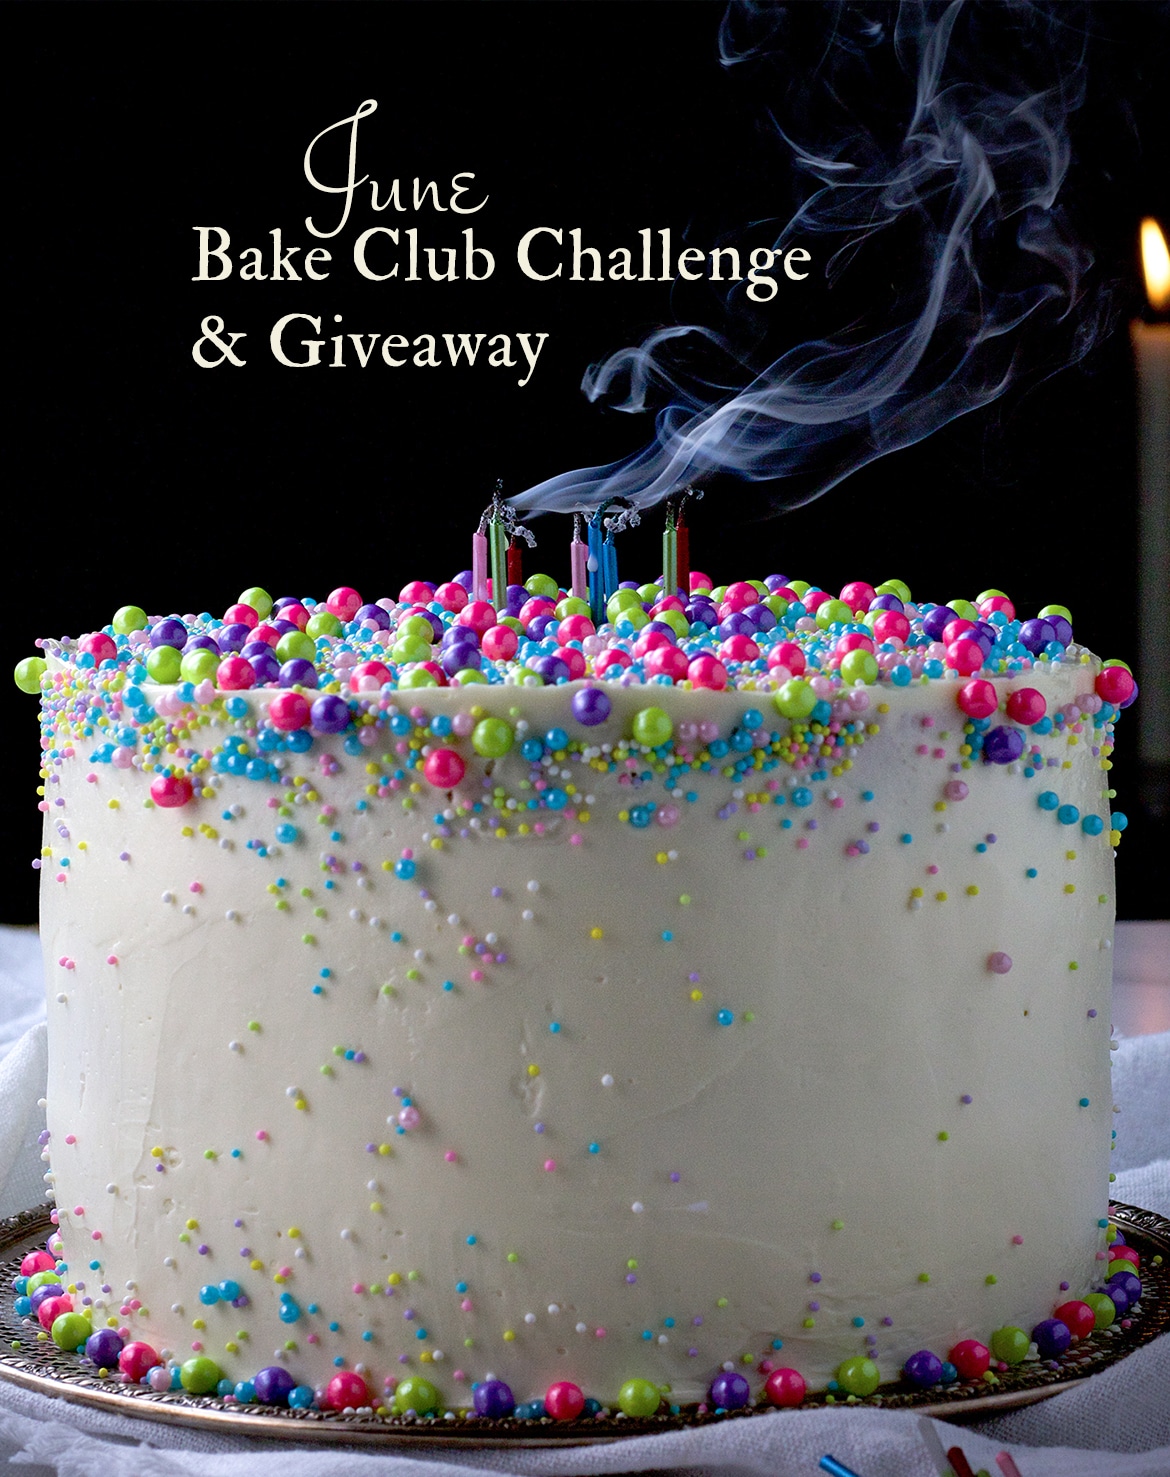 The June Bake Club Challenge is a Vanilla Layer Cake with Italian Meringue Buttercream